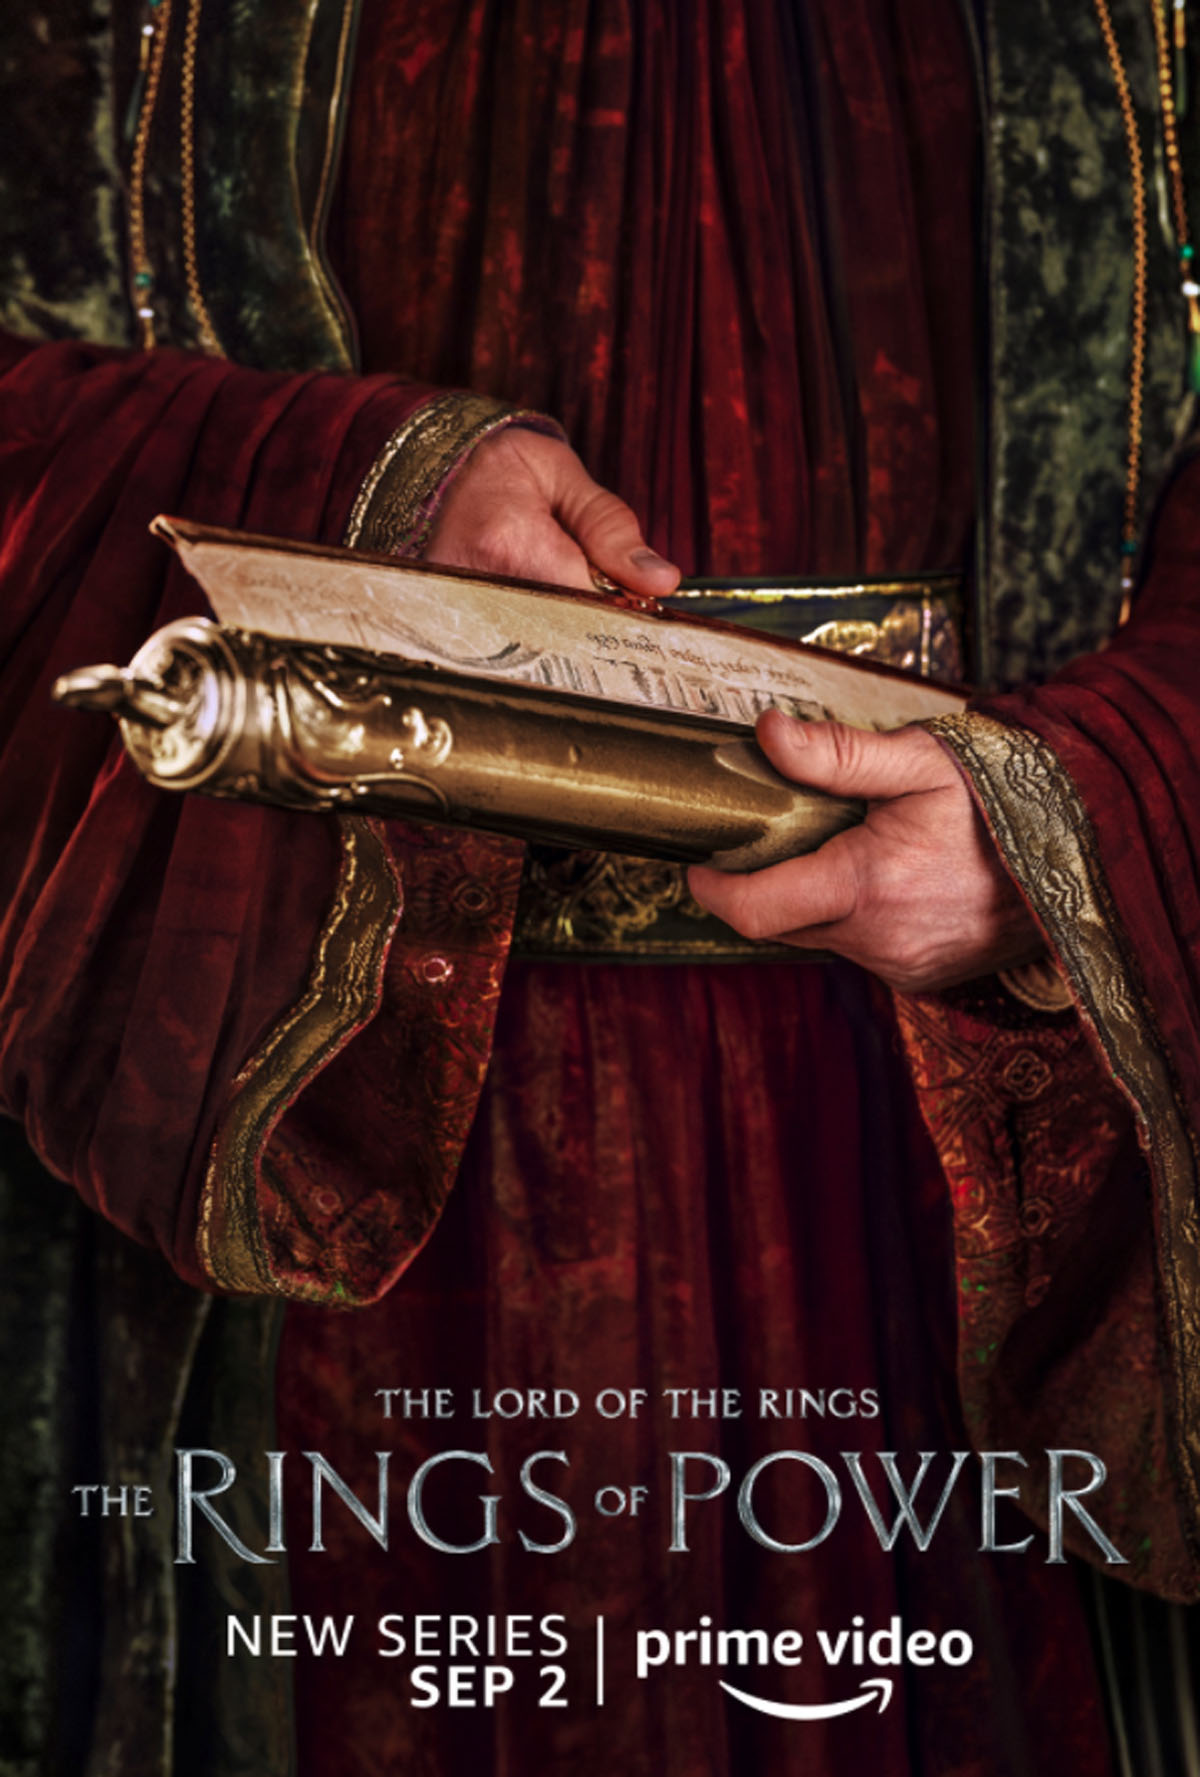 UK. A poster for (C) Studios new series : The Lord of the Rings: The  Rings of Power (2022) . Plot: Epic drama set thousands of years before the  events of J.R.R.